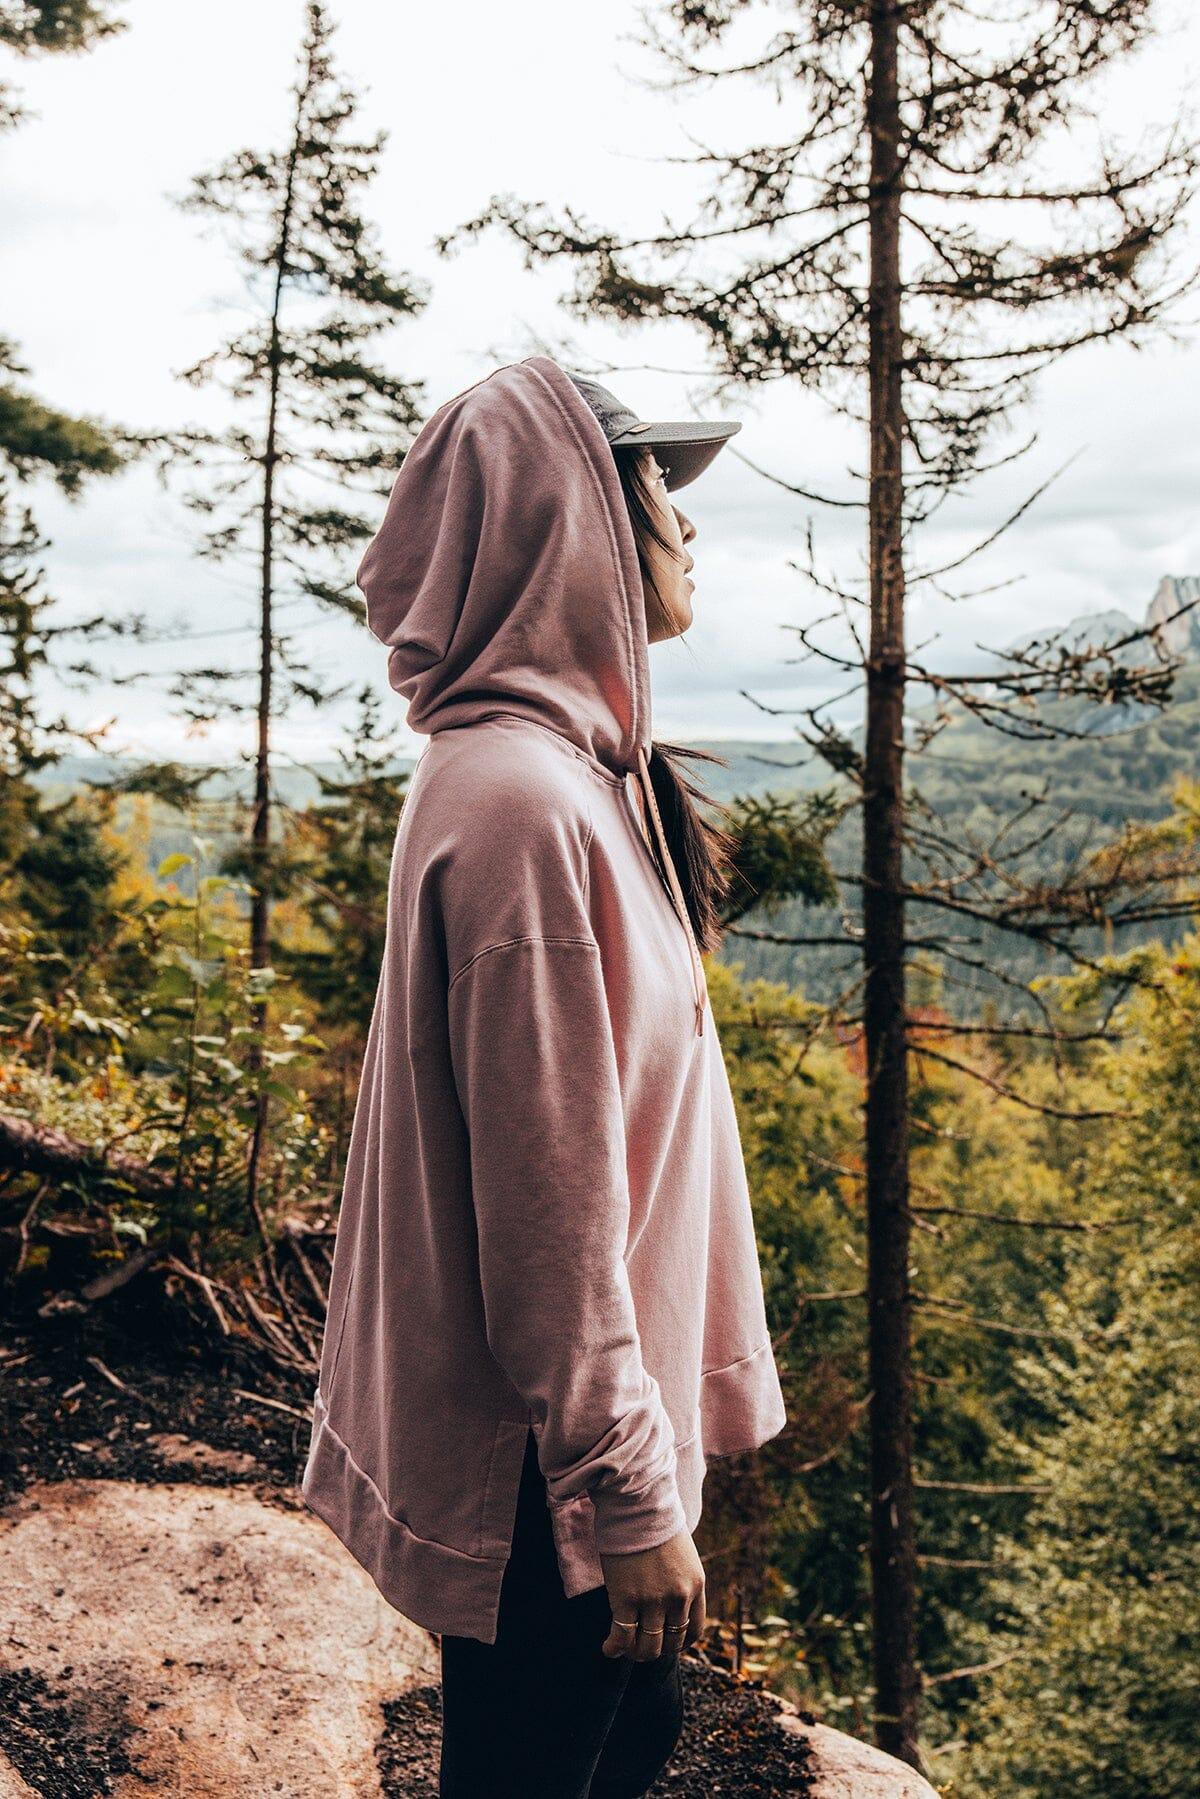 Femme qui porte le chandail Chill out de Rose Boreal./ Women wearing the Chill Out Hoodie by Rose Boreal. -Eglantine